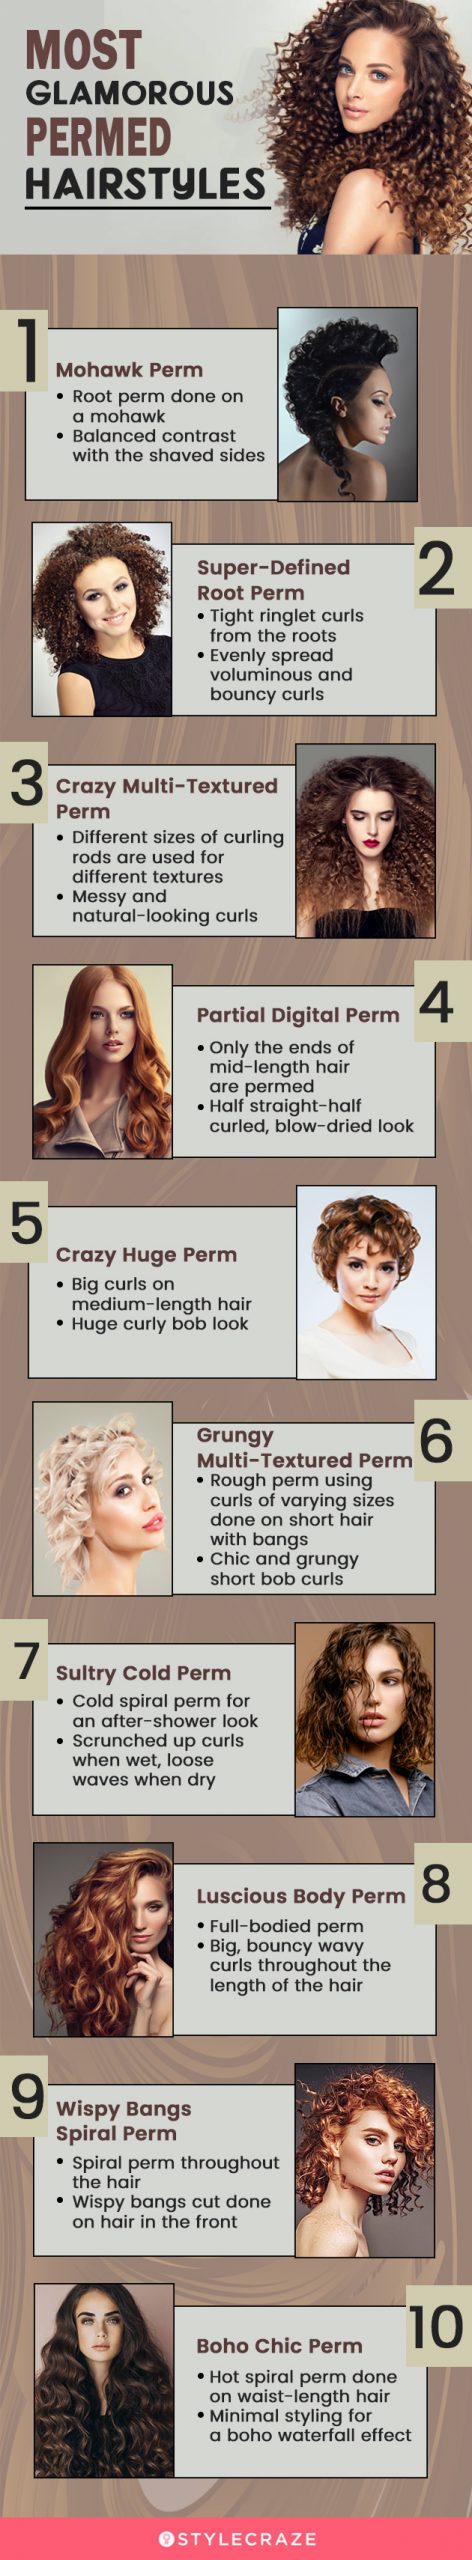 42 Stunning Permed Hairstyles For Women To Choose From